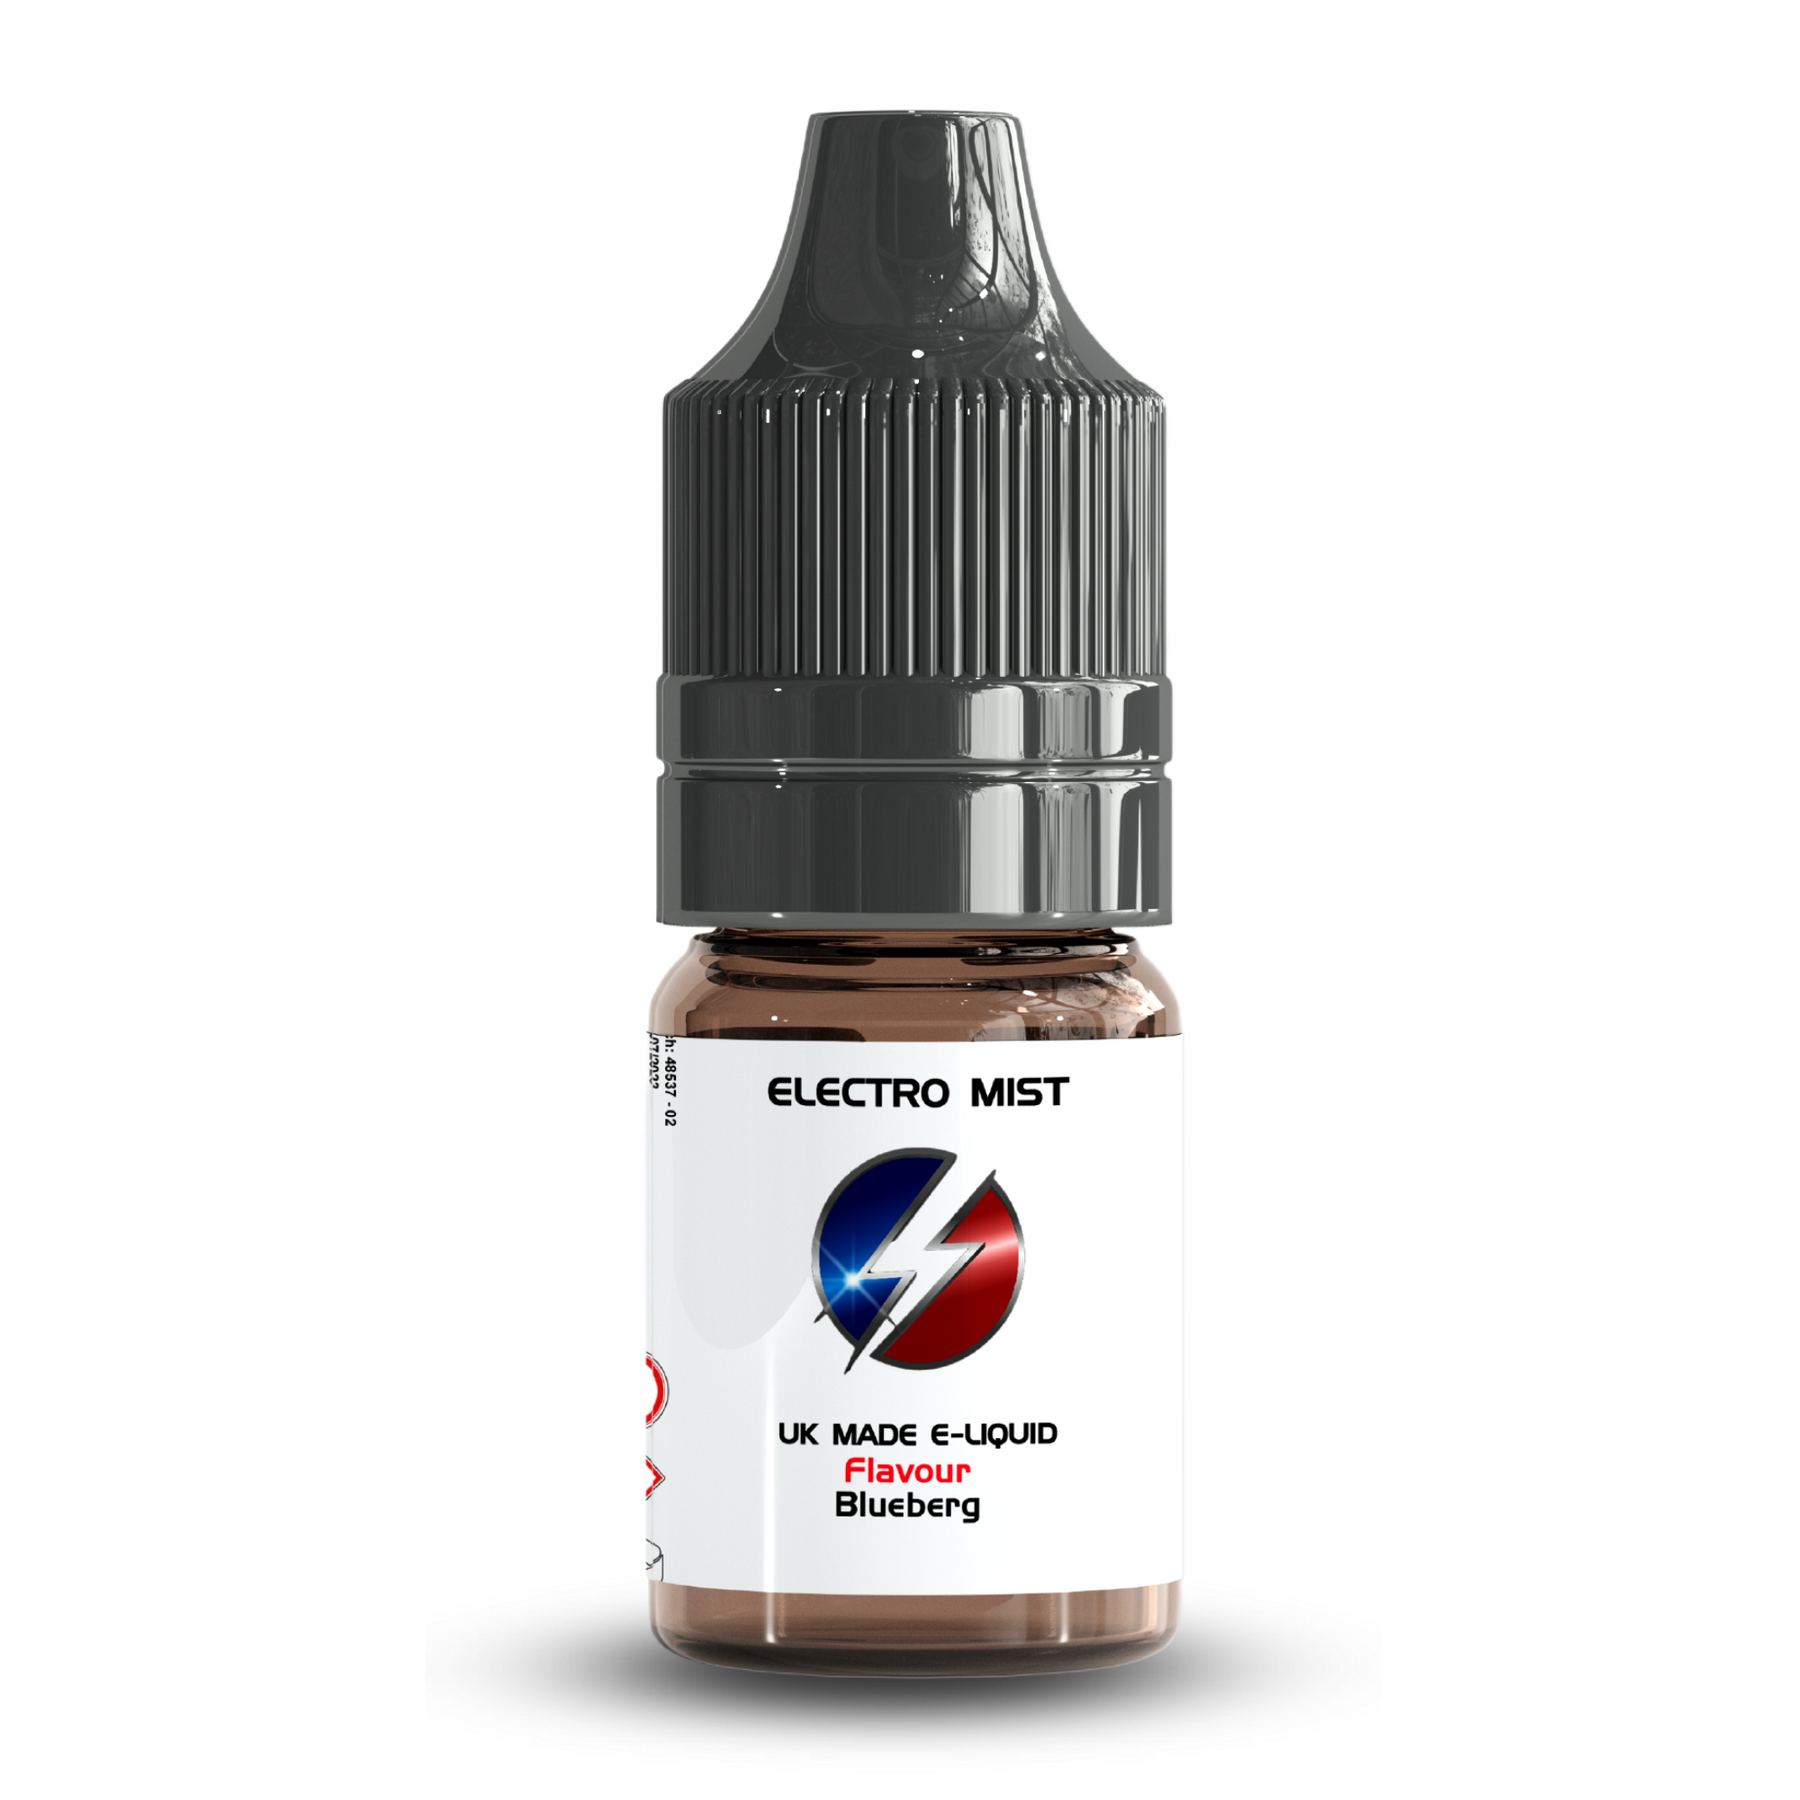 Electromist, the e-liquid brand you can trust. Get your taste buds ready for a flavour sensation, Blueberg. Nicotine Content: 3mg/6mg/12mg. Products may contain nicotine. For over 18s Only ejuice, vape pen, eliquid, e cigarette, 10ml, vaping, cloud, PG, VG, 60/40, vape liquid, Flavour